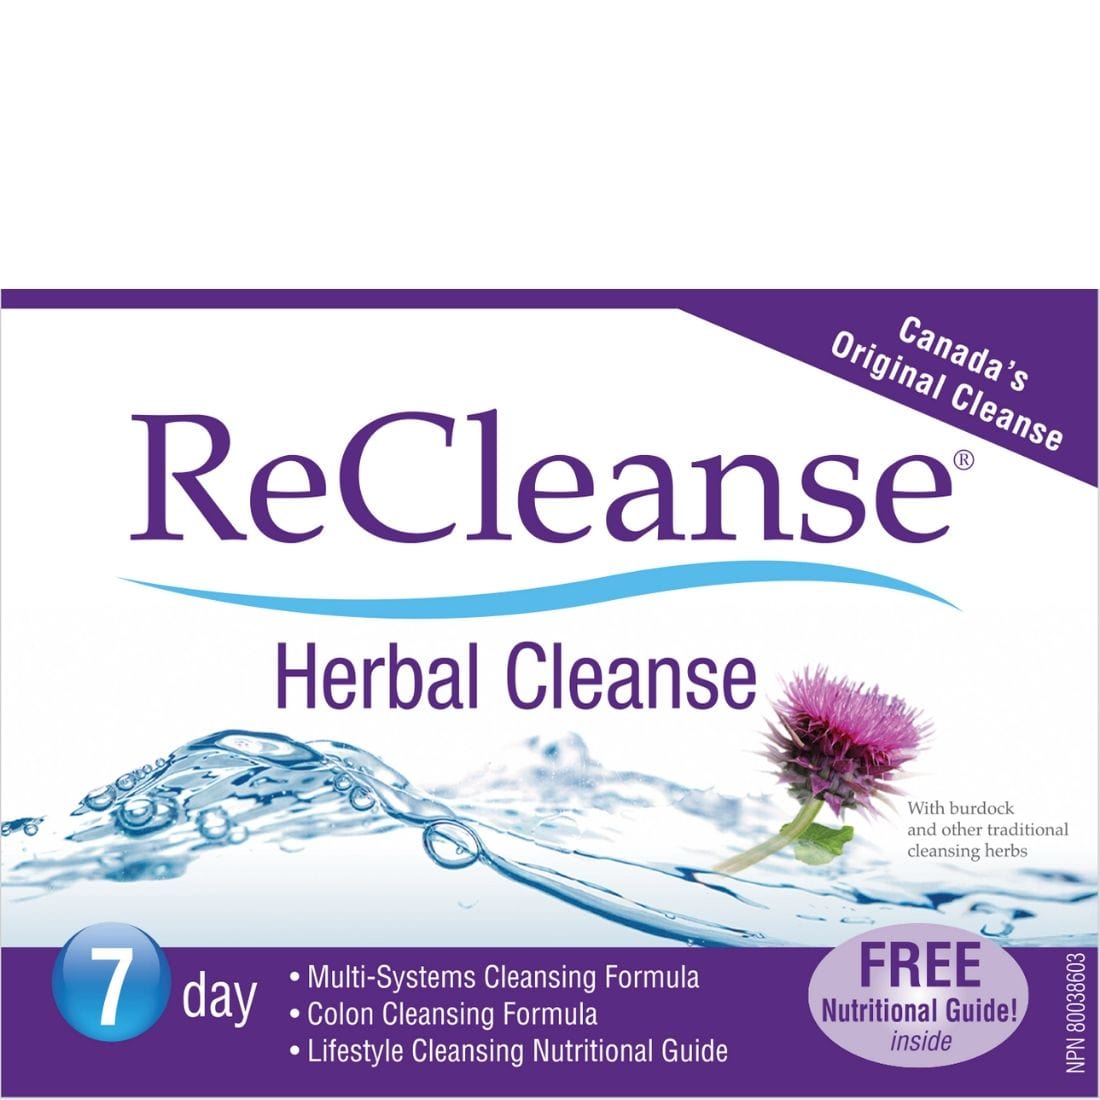 Prairie Naturals ReCleanse Herbal Cleanse, 7 Day Whole Body Detox Kit